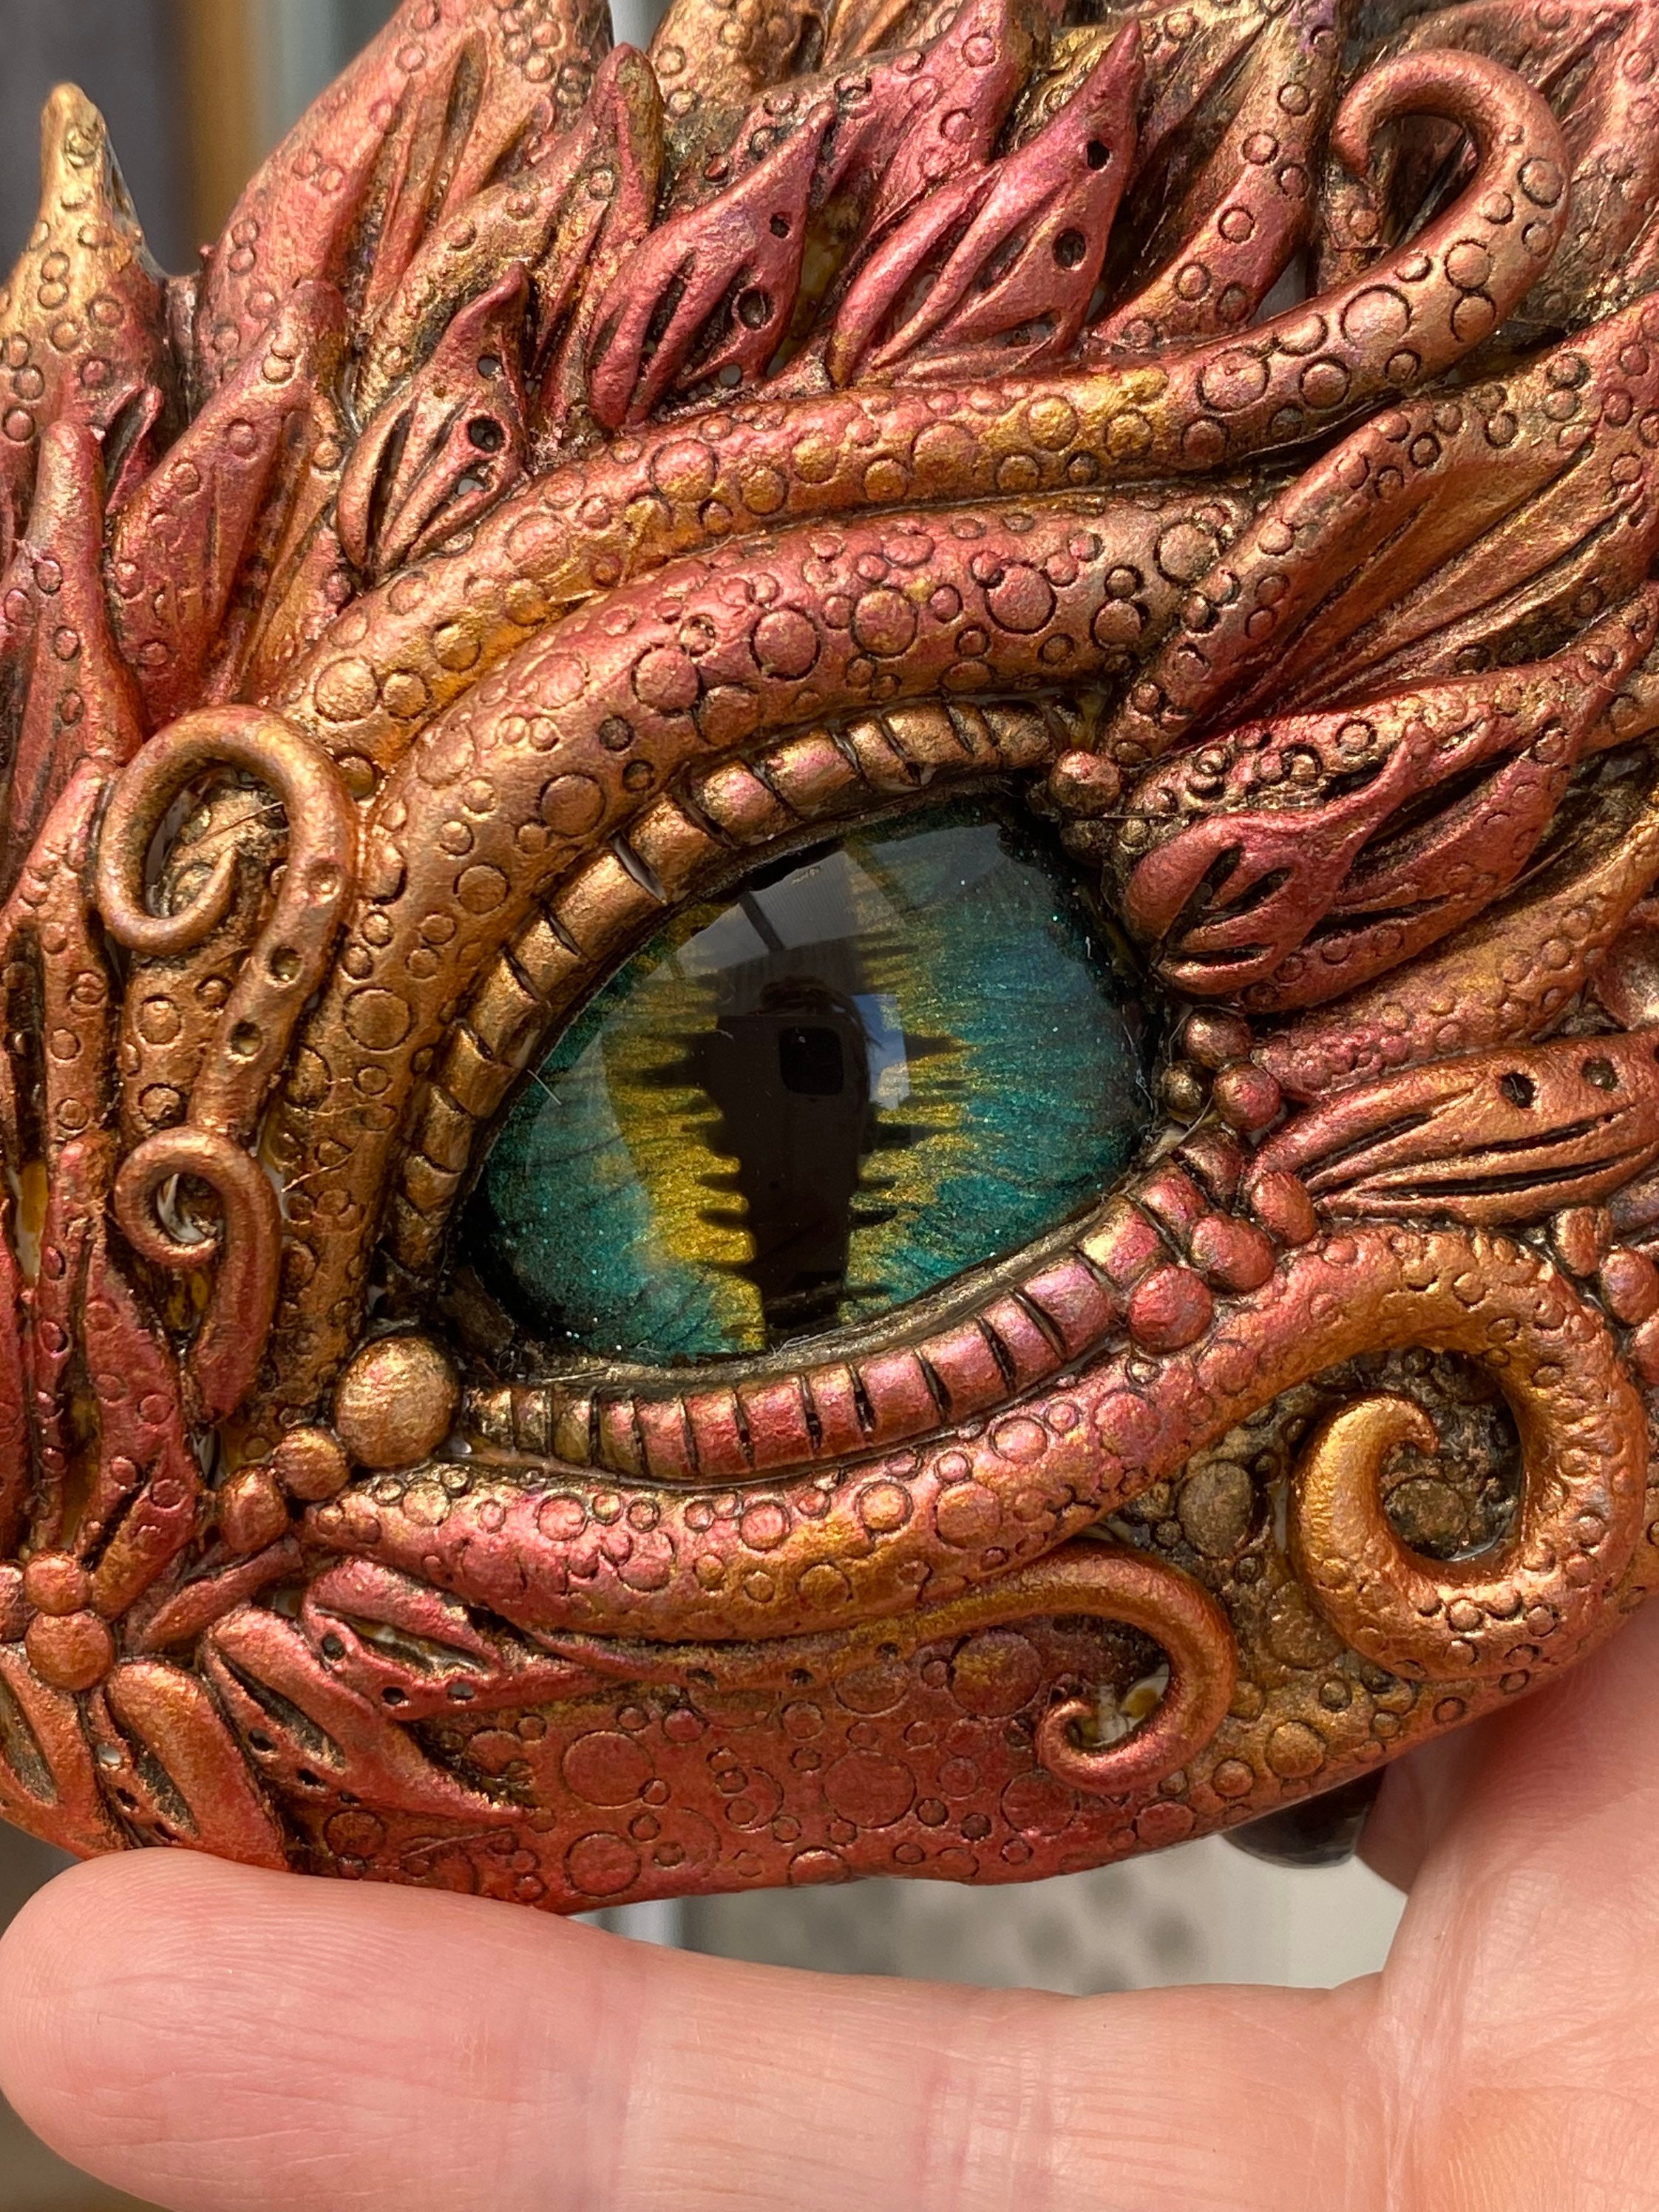 Artist Crafts Fantasy-Inspired Accessories Featuring Realistic Dragon Eyes